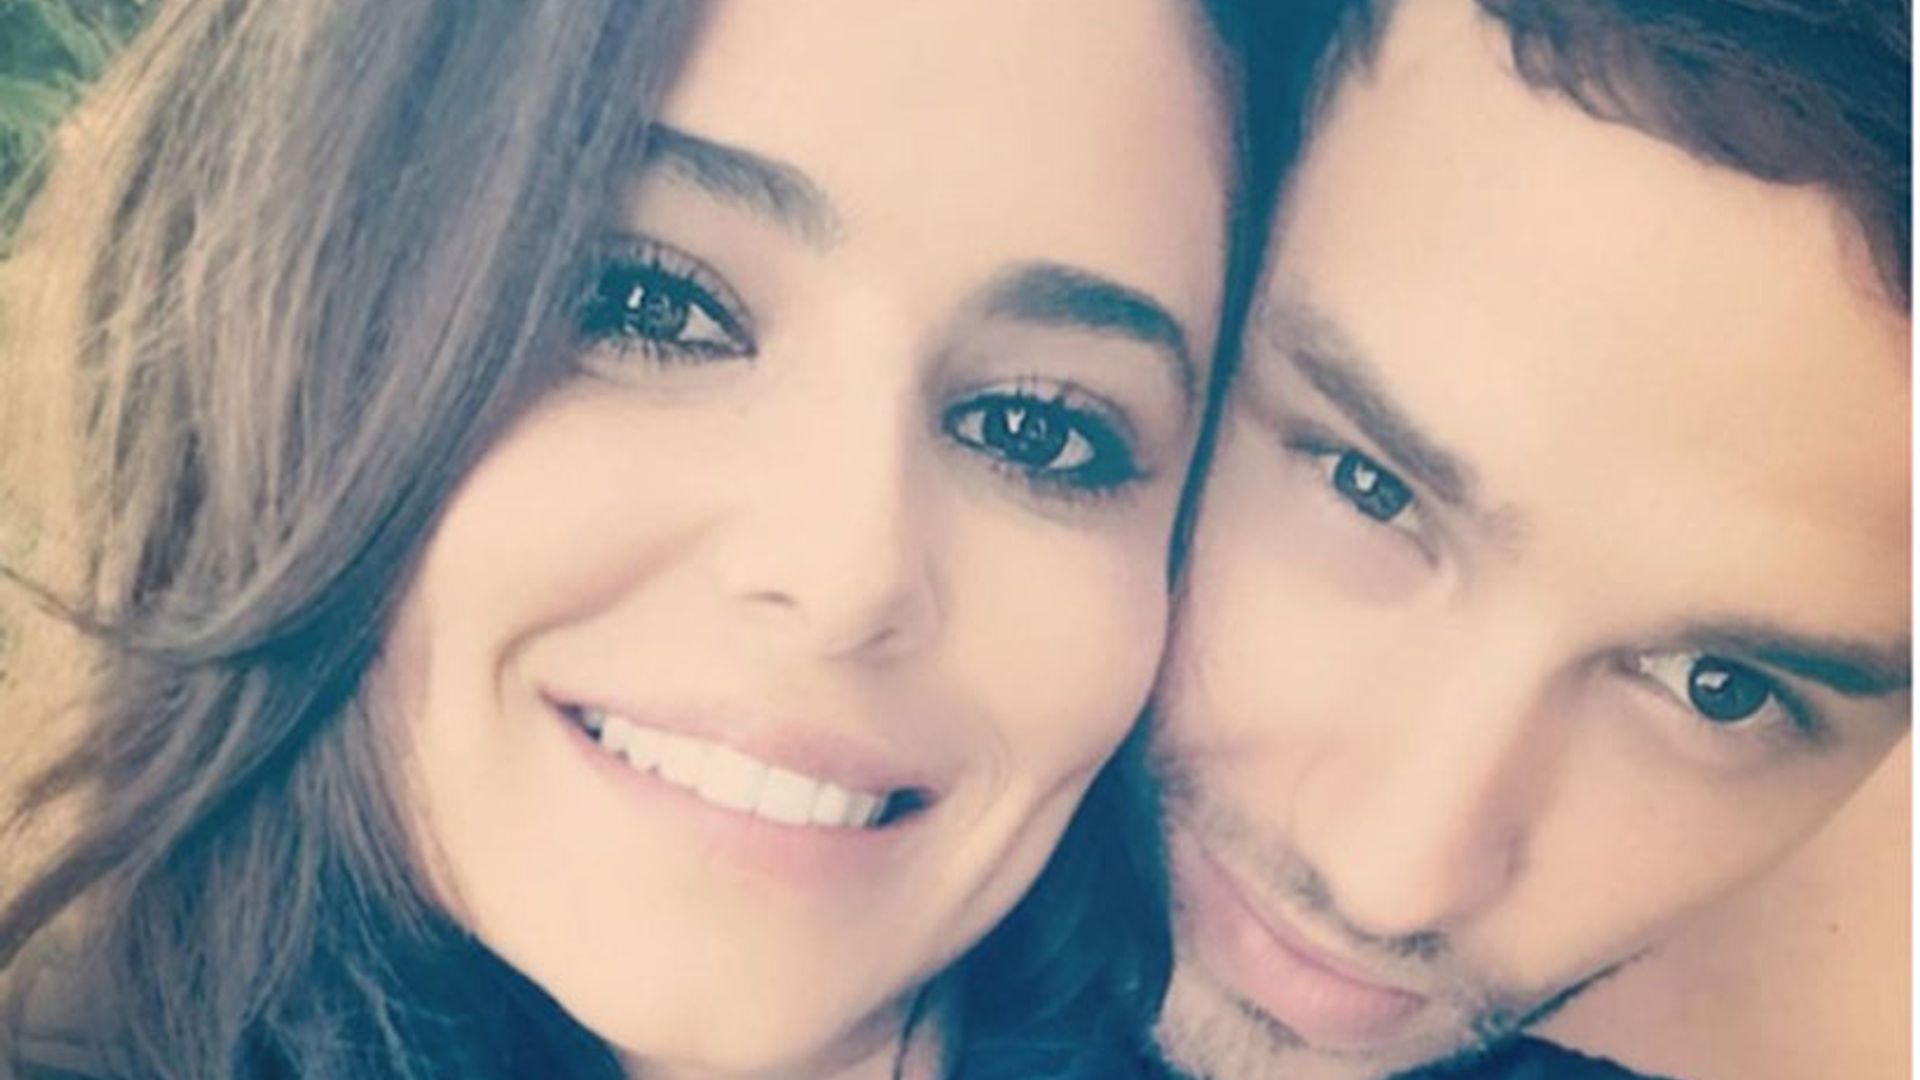 Liam Payne shares rare loved-up selfie with Cheryl